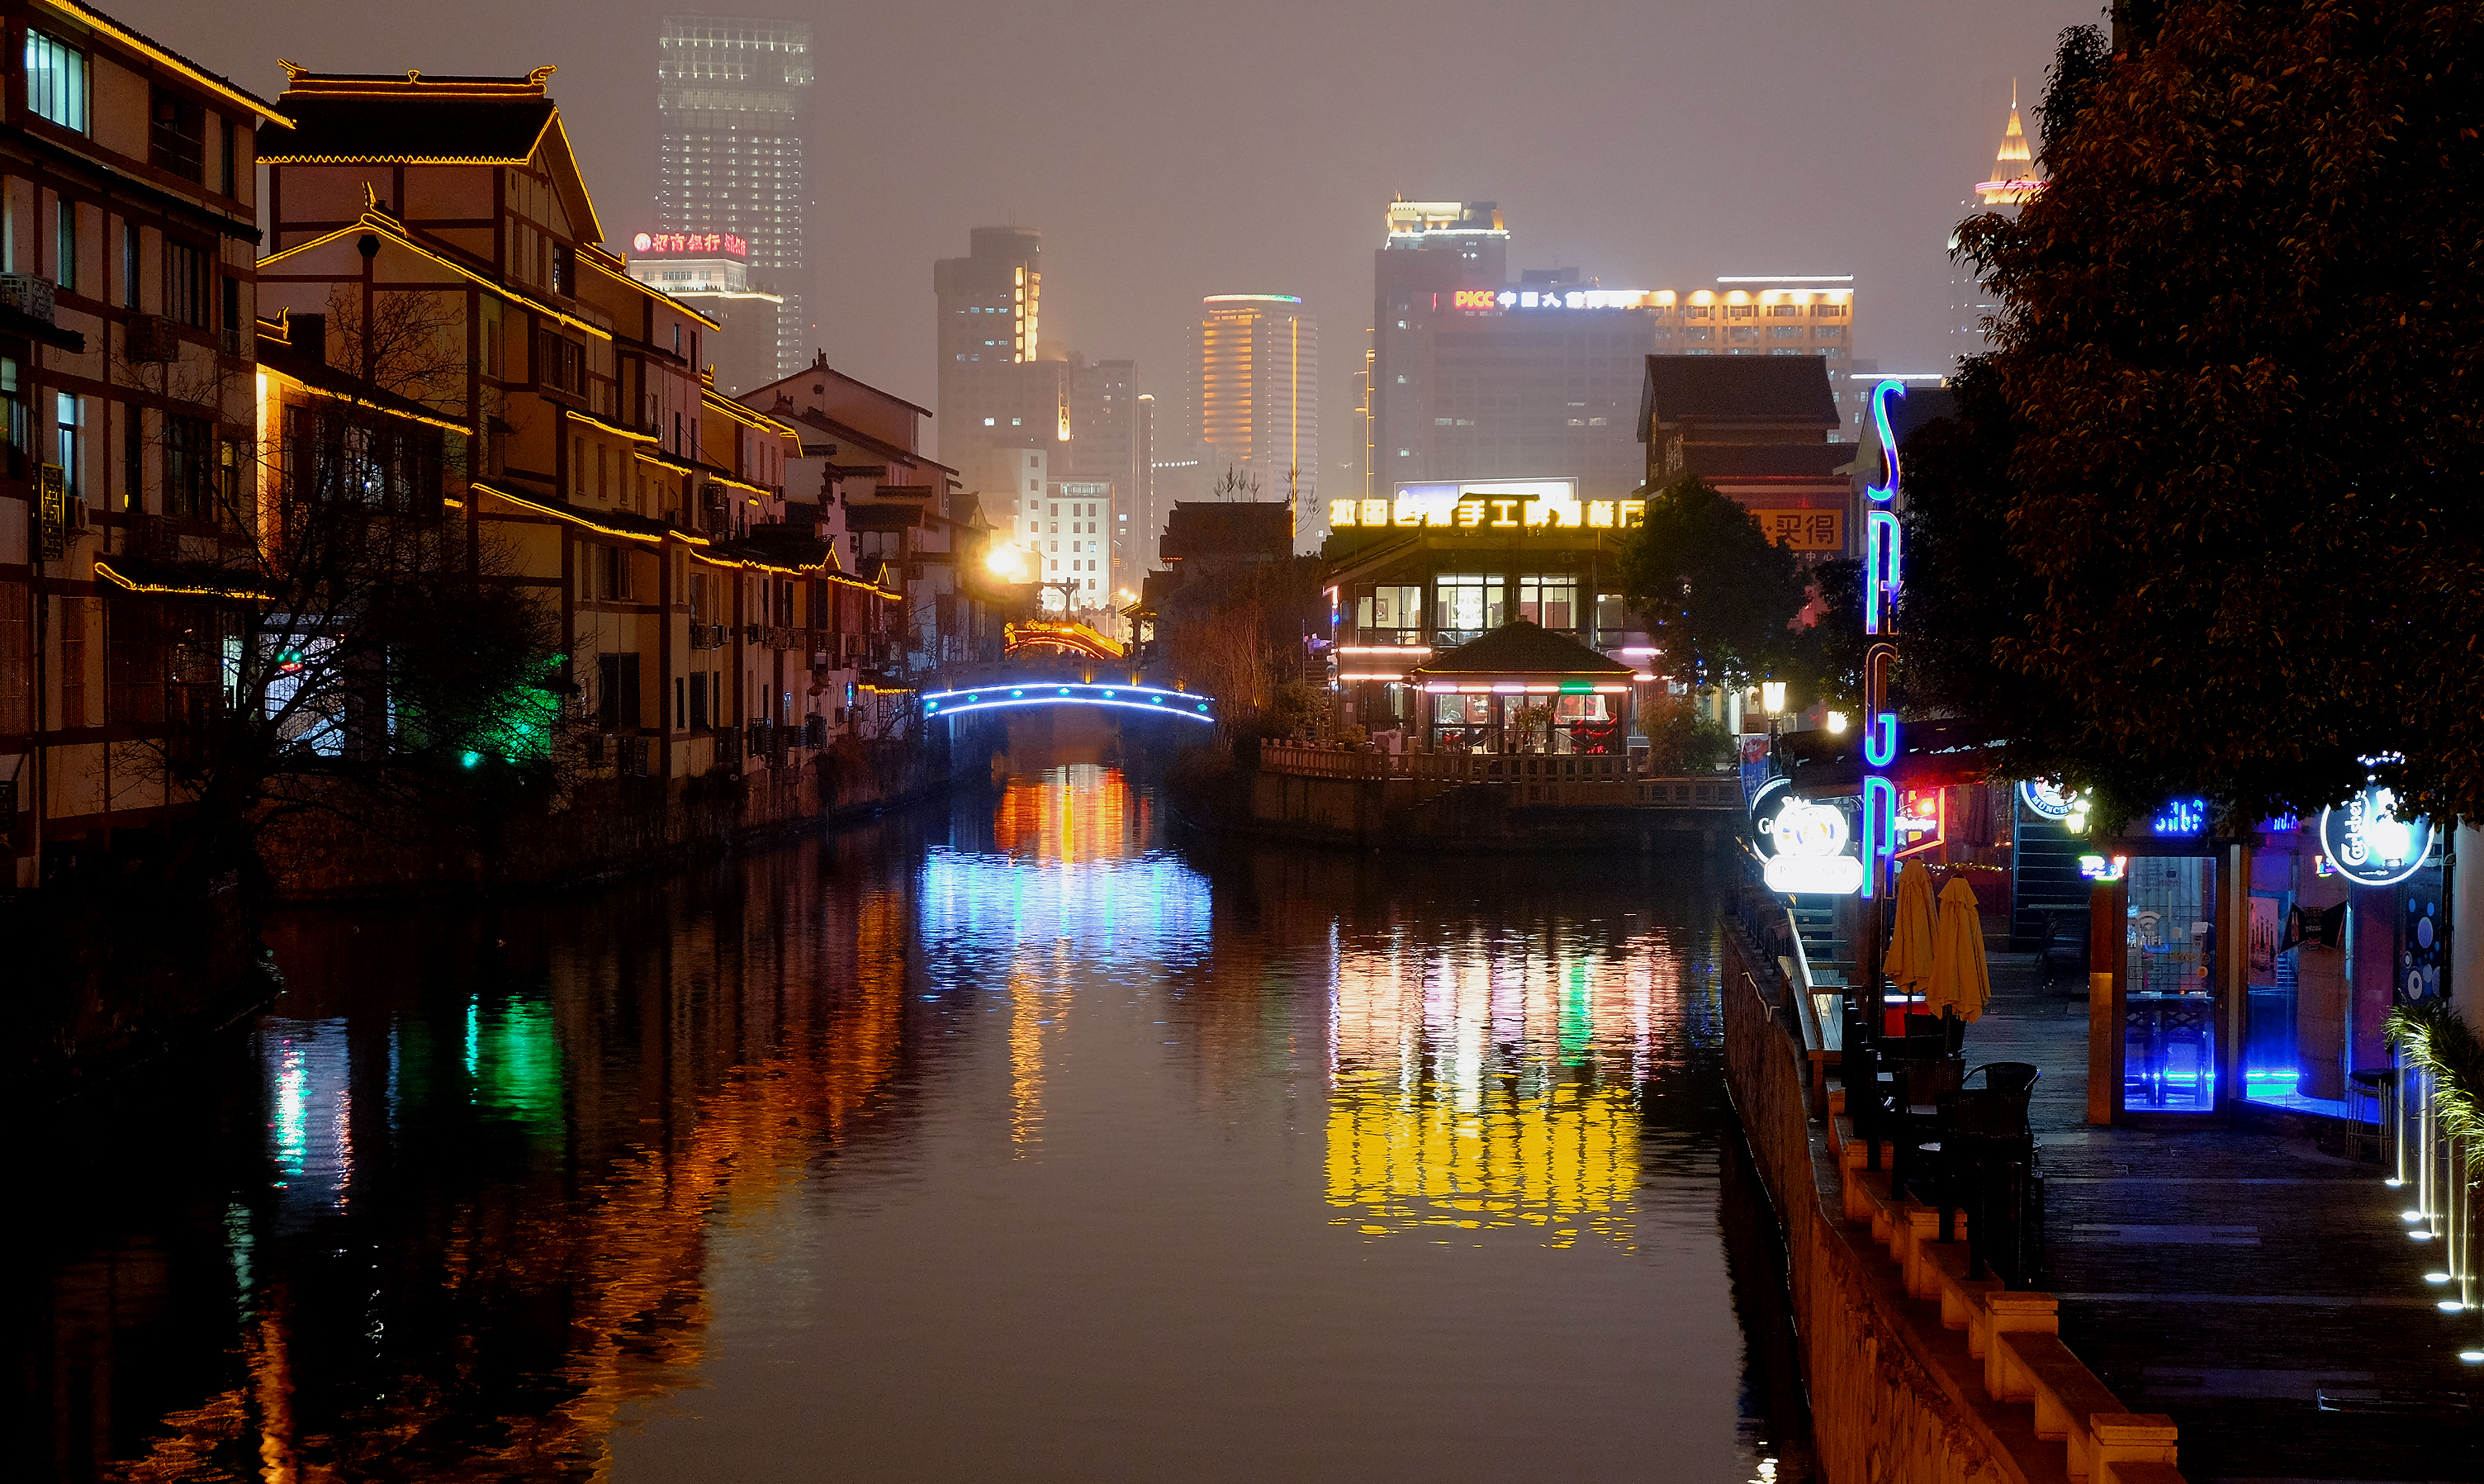 [Translate to English:] city in China by night